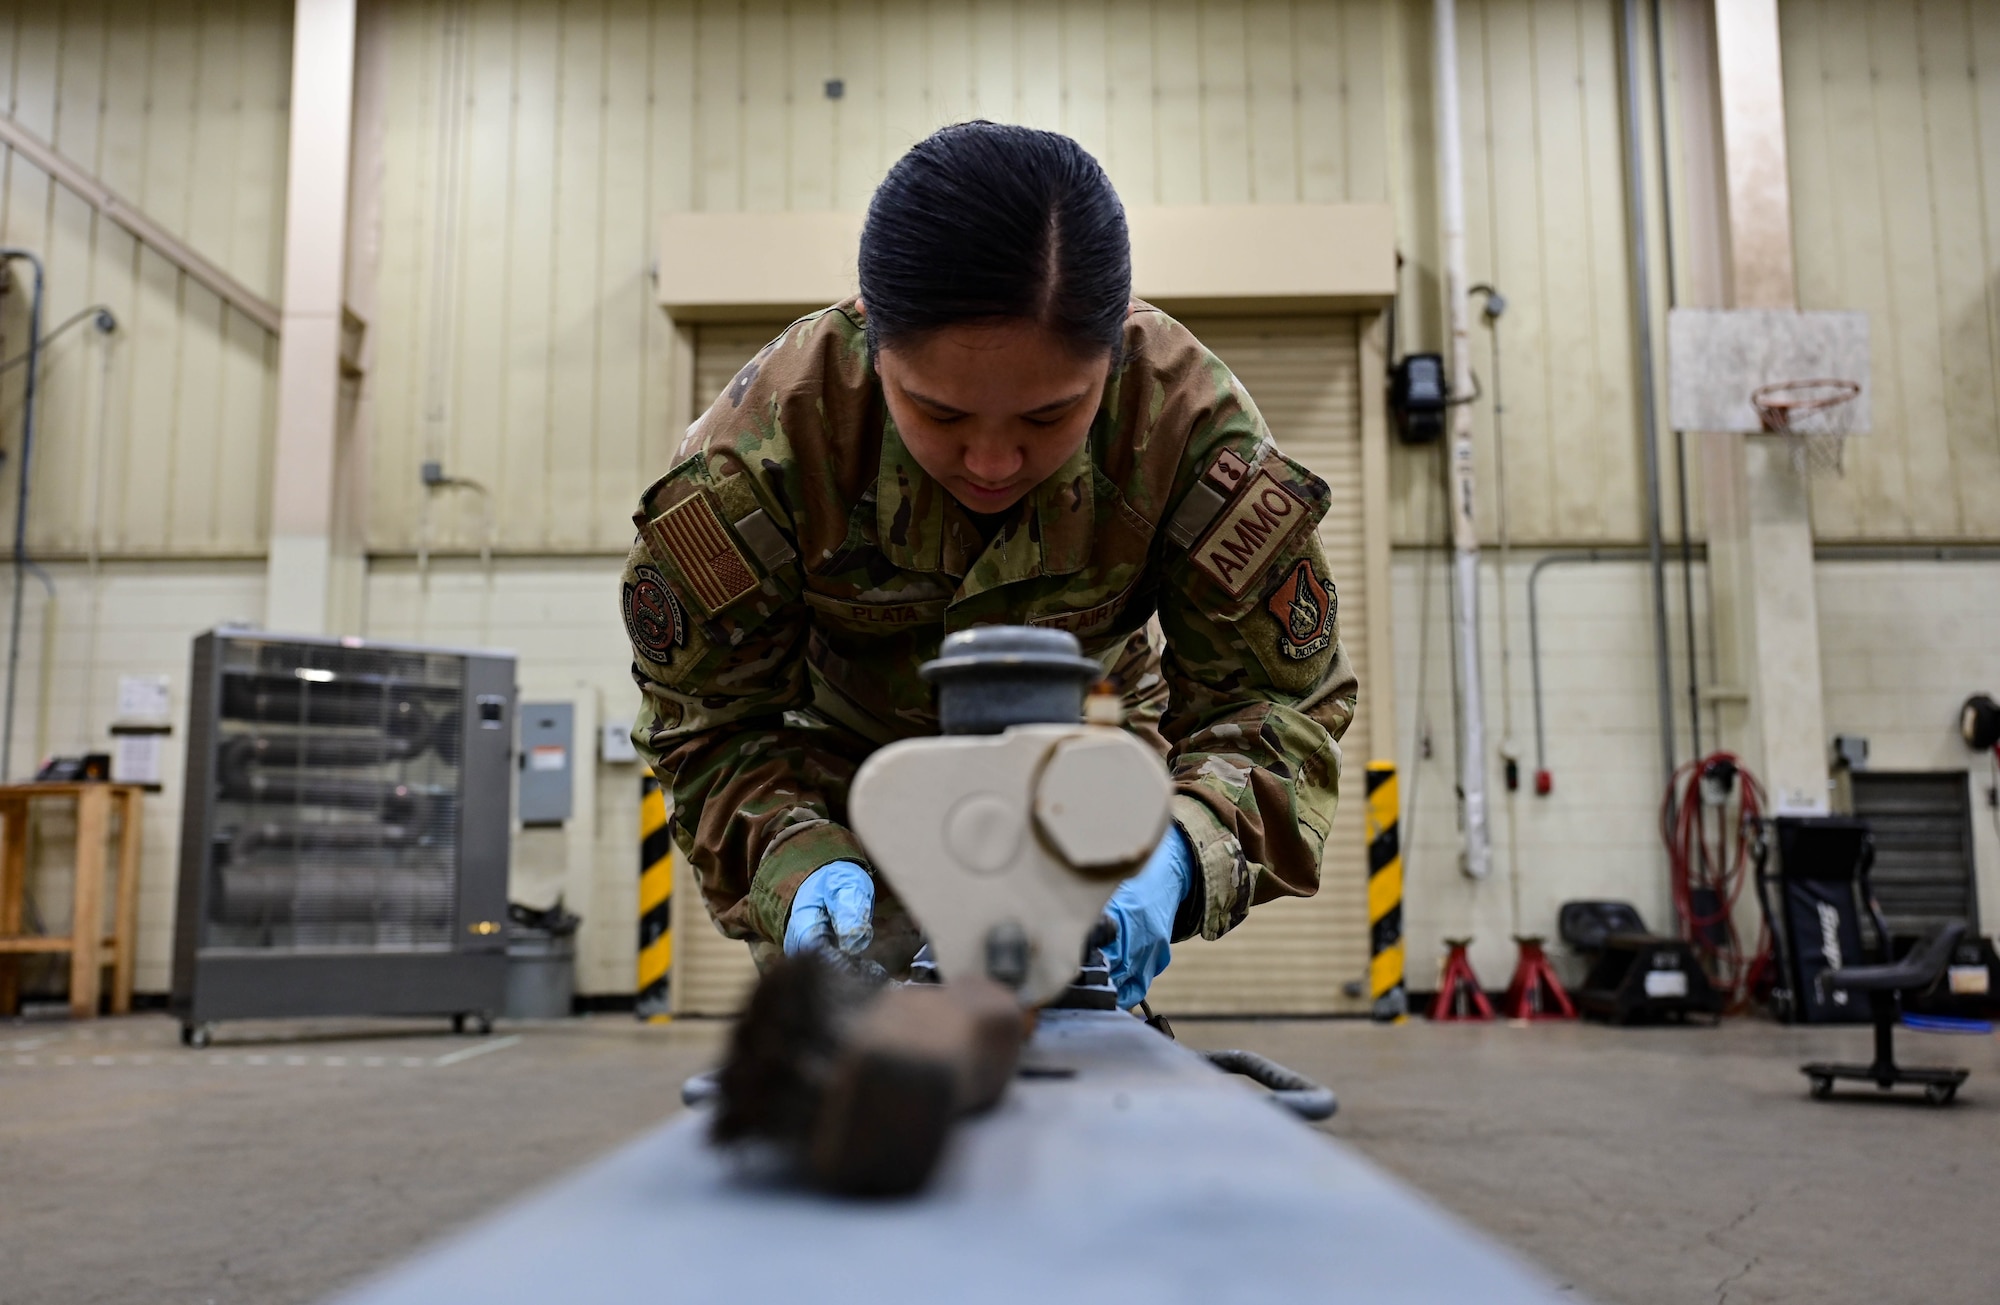 Staff Sgt. Kimberlyn Plata, 8th Maintenance Squadron munitions systems equipment maintenance crew chief, works on a munitions trailer tow hitch at Kunsan Air Base, Republic of Korea, Mar 15, 2023.